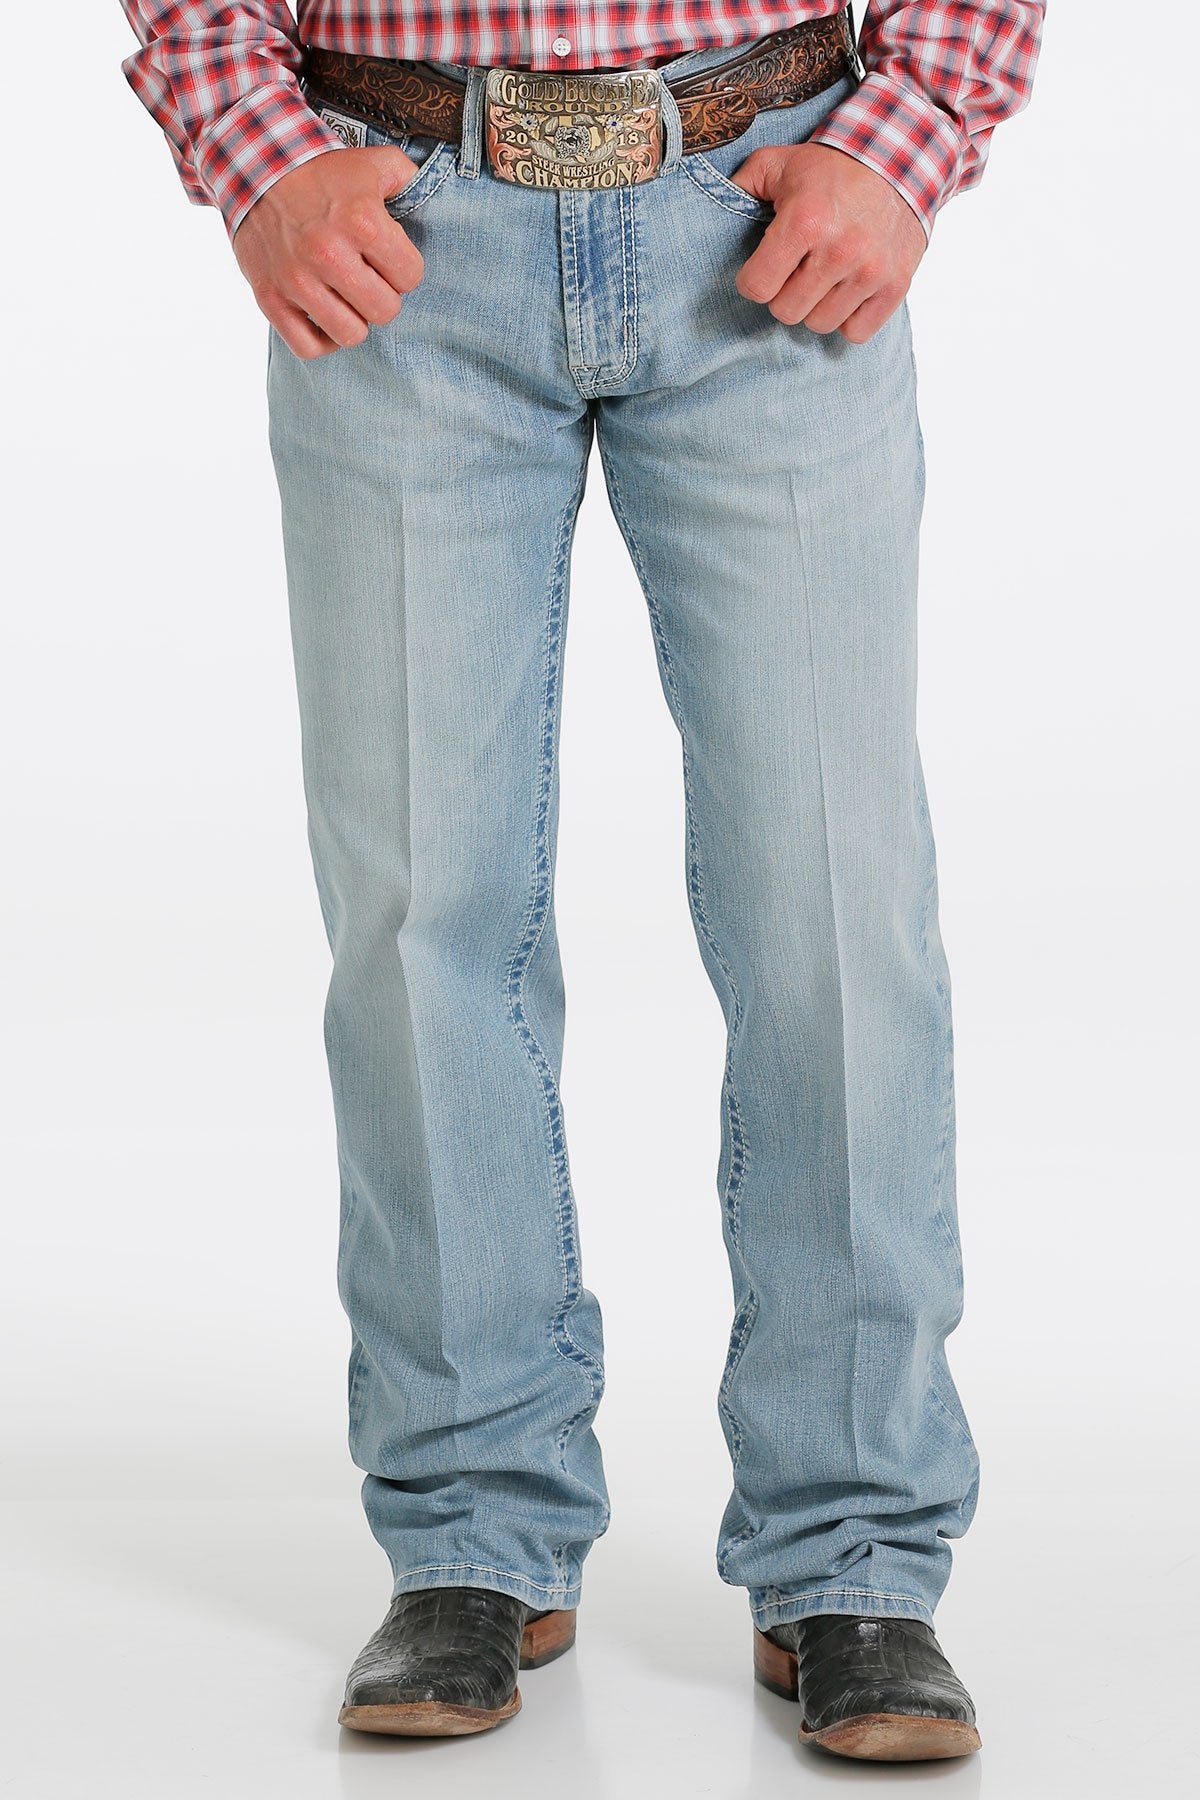 CINCH MEN'S RELAXED FIT WHITE LABEL - LIGHT STONEWASH